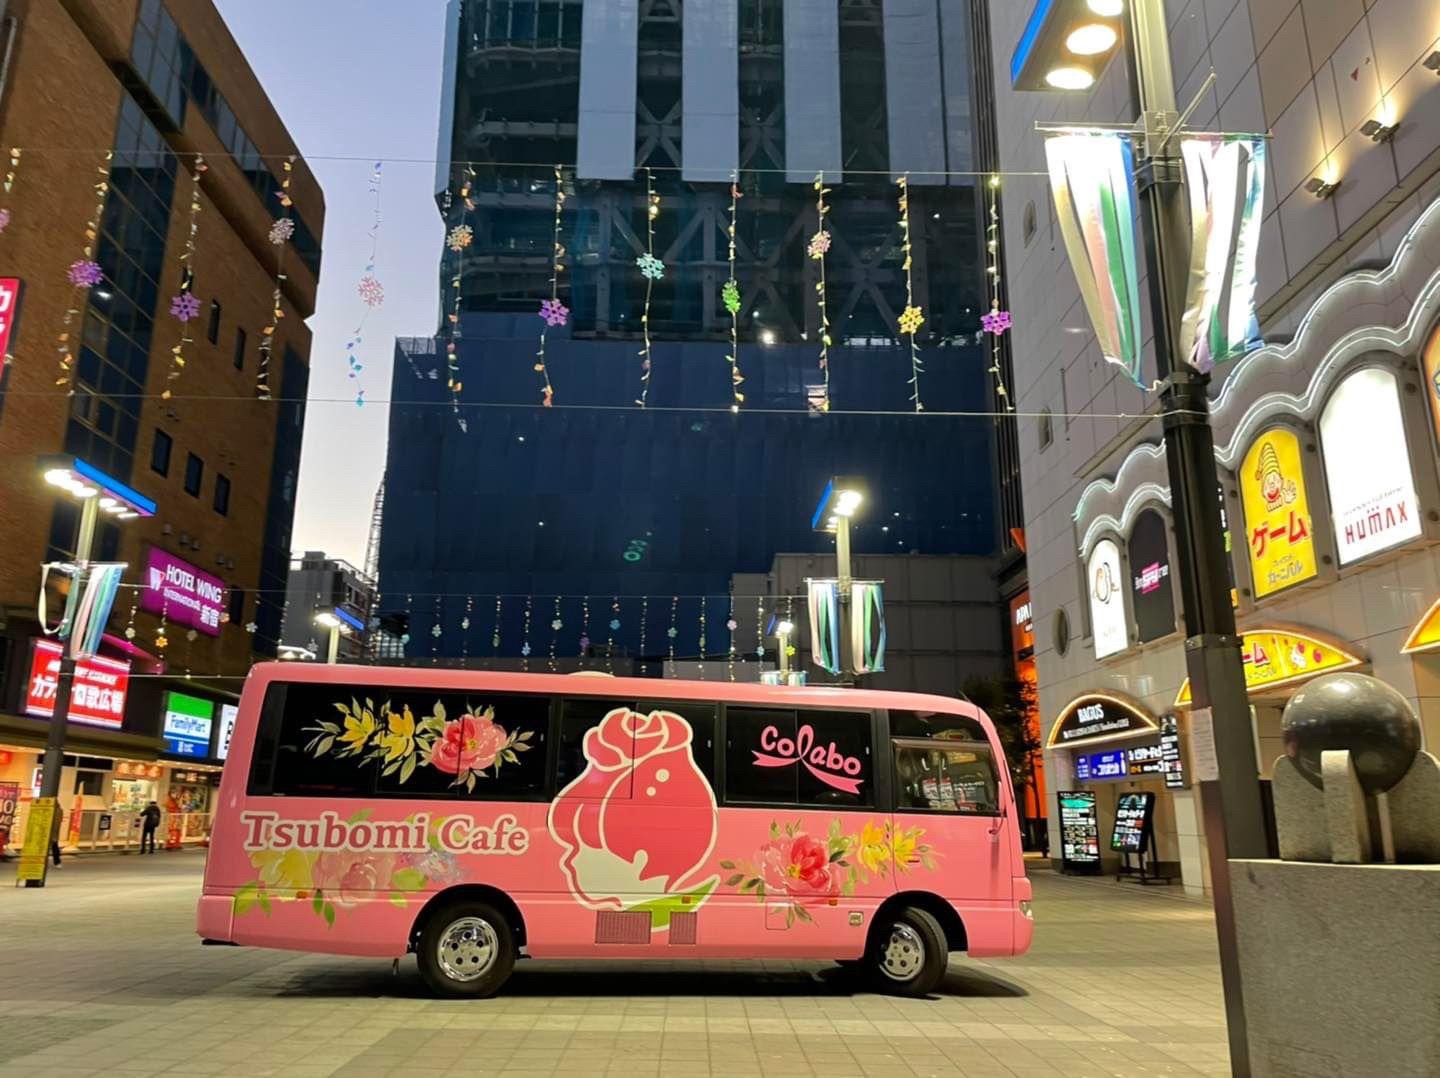 Colabo provides a shelter for victims of sexual and domestic violence through the Tsubomi Cafe, which was created by remodeling buses. @ Colabo